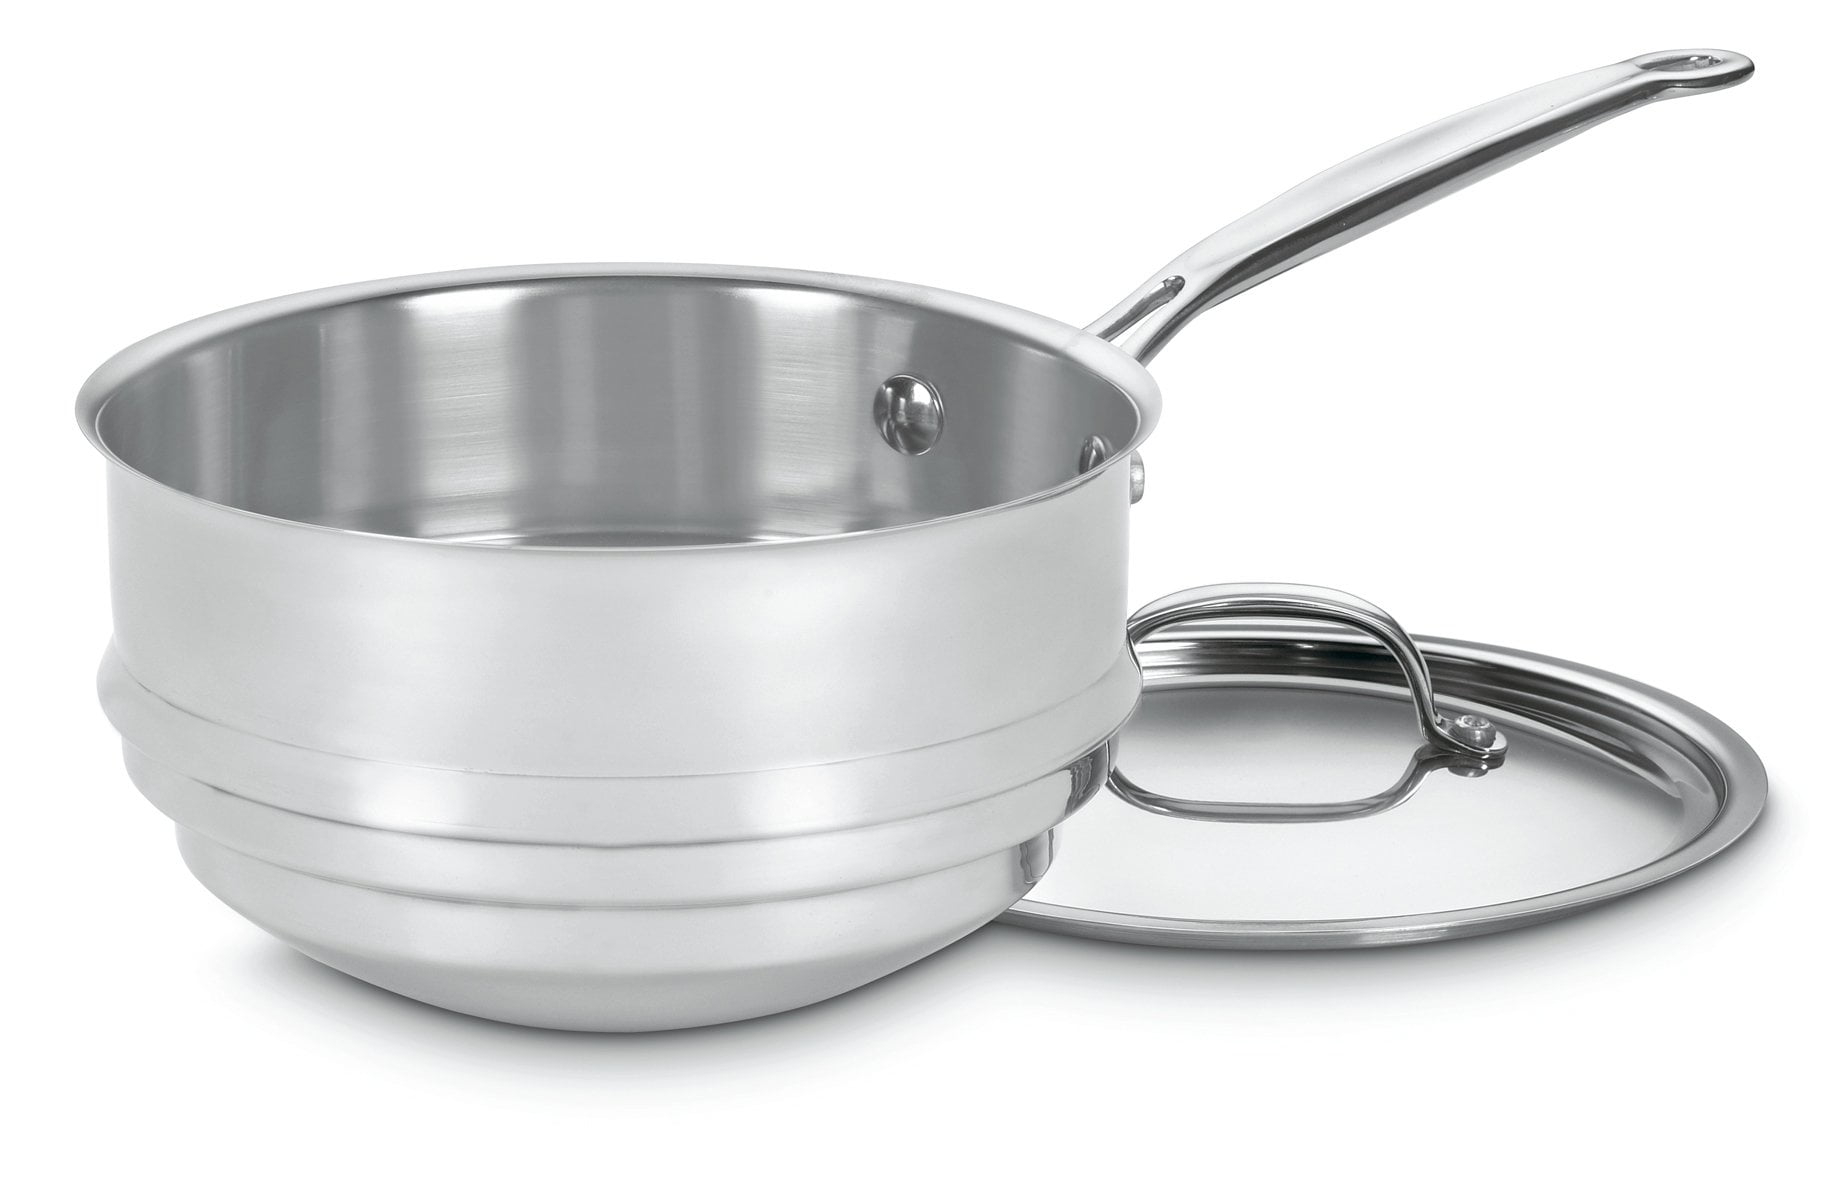 Farberware Classic Stainless Series 2-Quart Covered Double Boiler